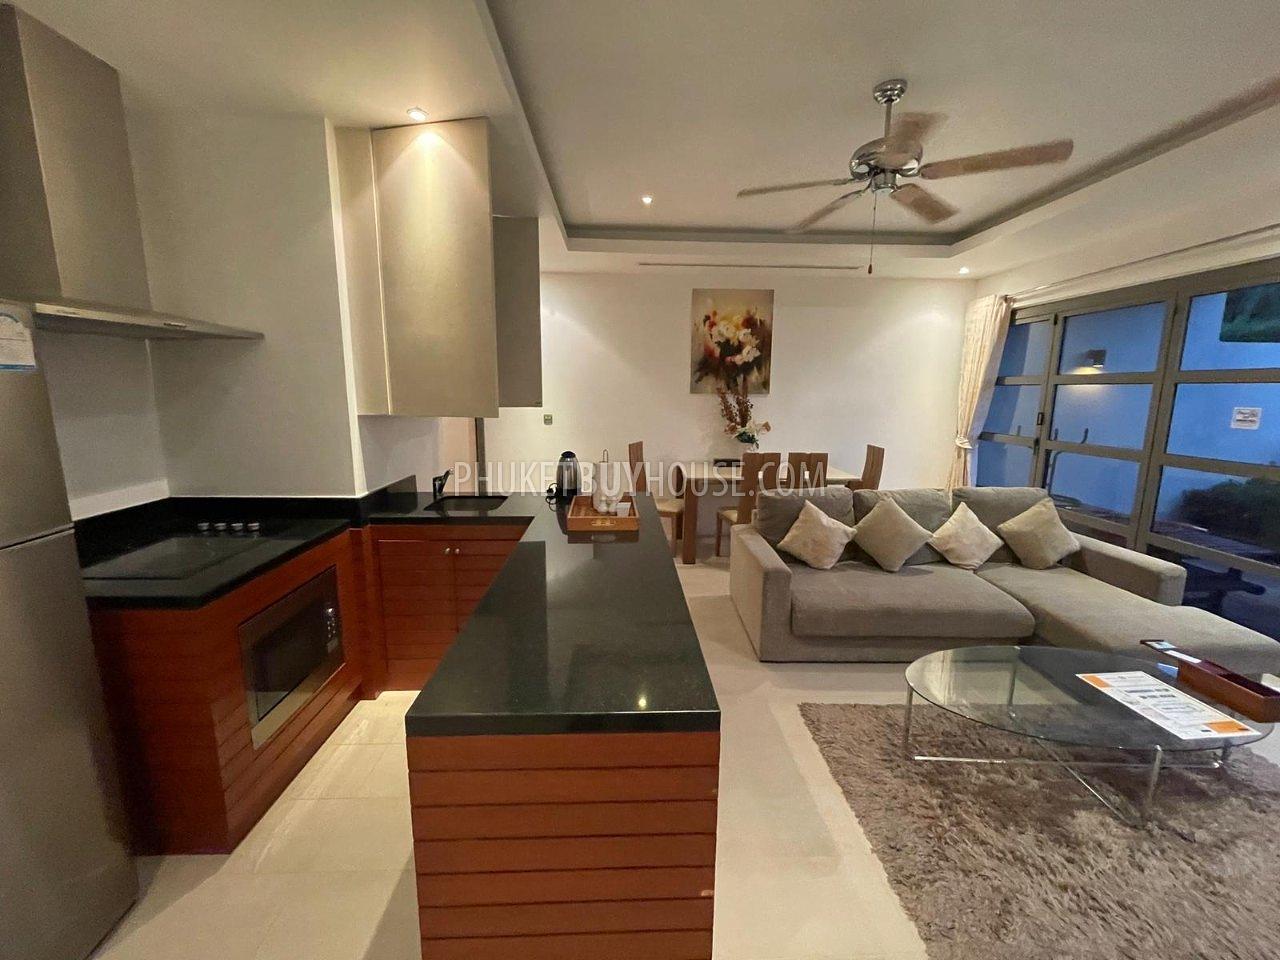 BAN6988: Lovely 1 bedroom House for Sale in Bang Tao area. Photo #7